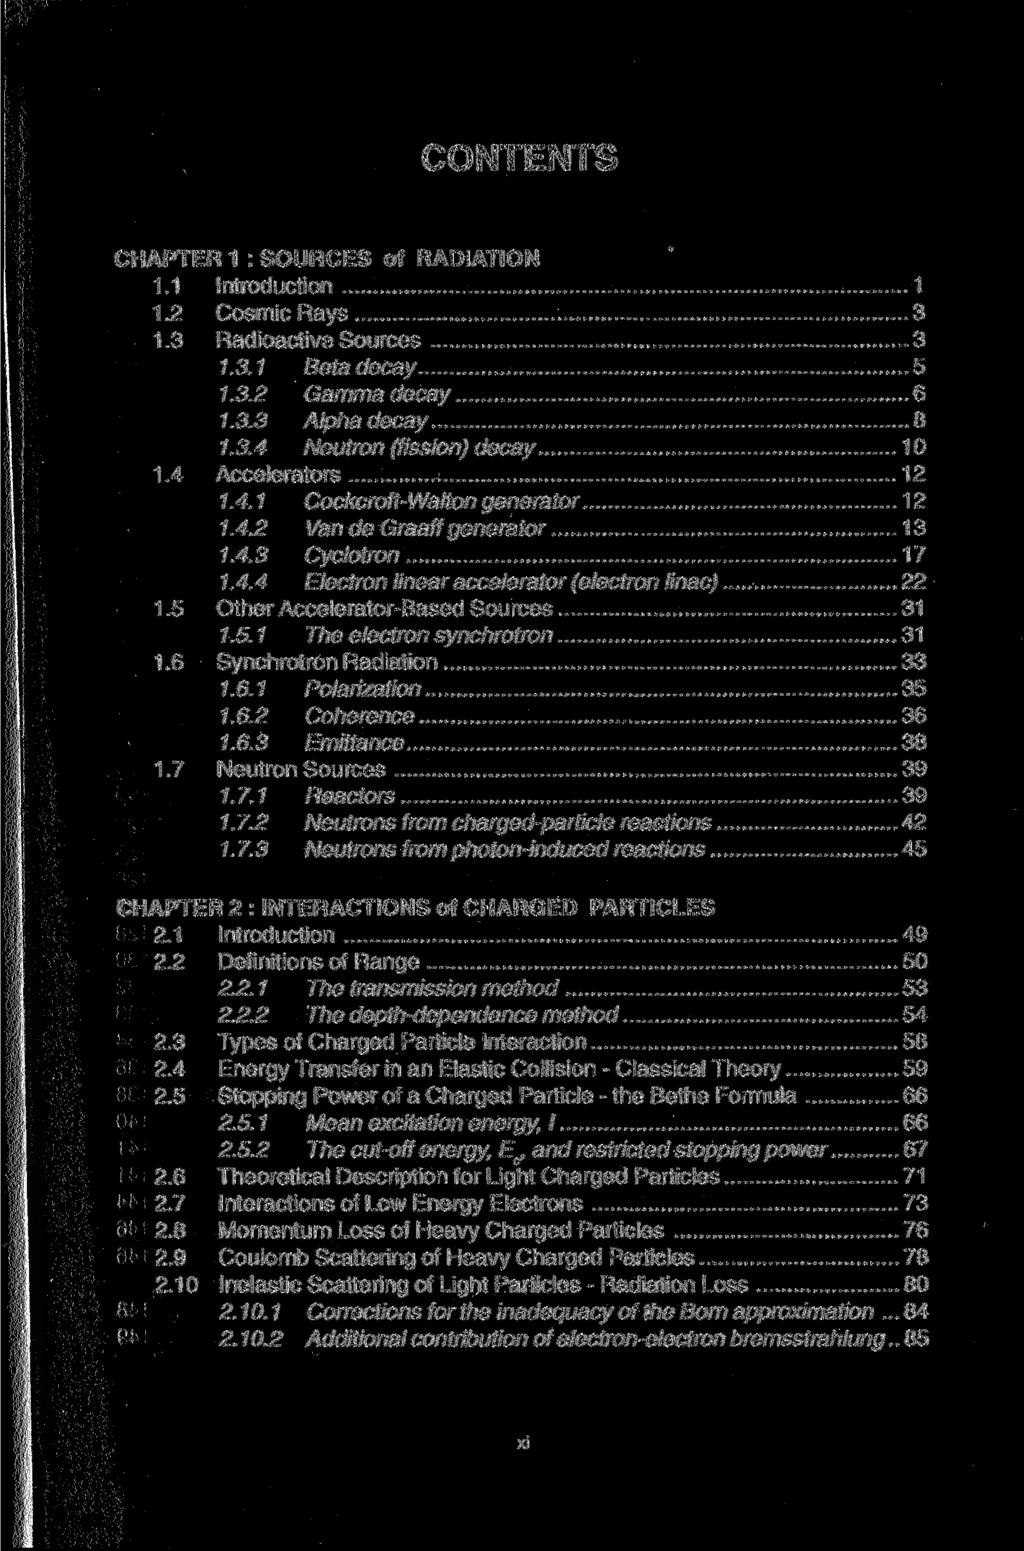 CONTENTS CHAPTER 1 : SOURCES of RADIATION 1.1 Introduction 1 1.2 Cosmic Rays 3 1.3 Radioactive Sources 3 1.3.1 Beta decay 5 1.3.2 Gamma decay 6 1.3.3 Alpha decay 8 1.3.4 Neutron (fission) decay 10 1.